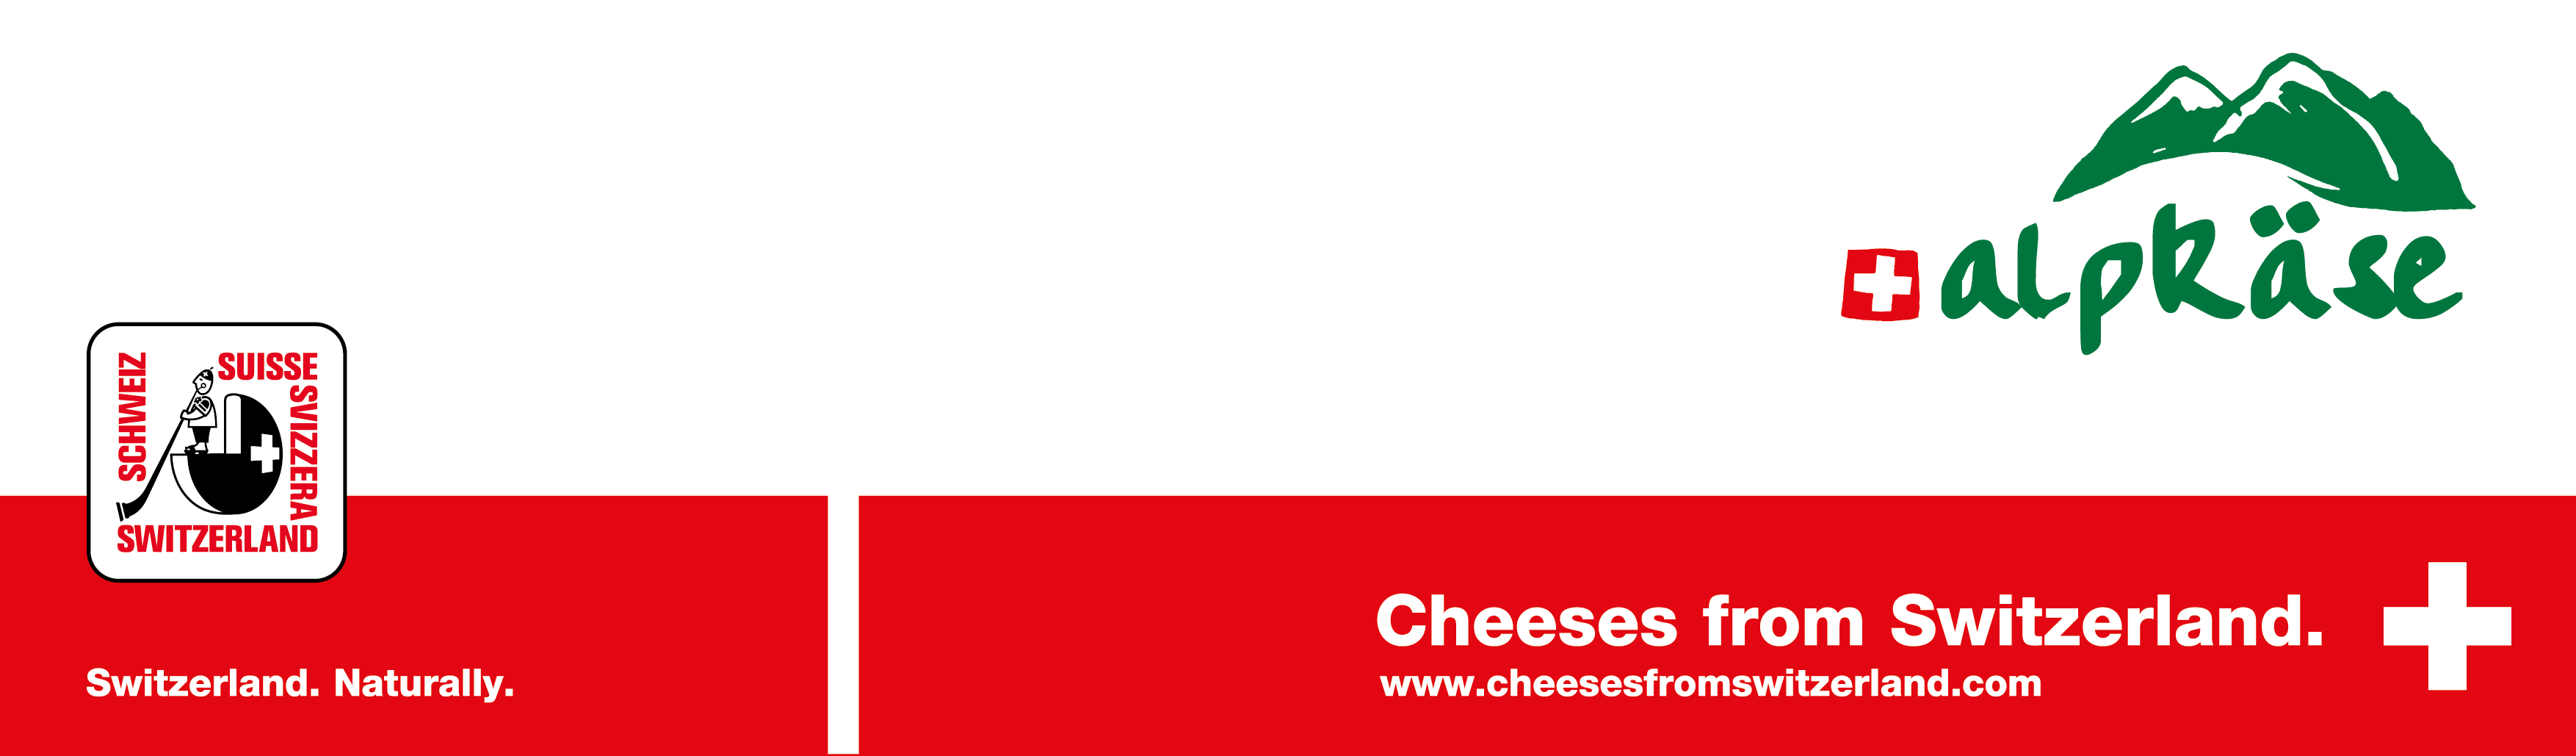 Alpkase certified cheeses from Switzerland